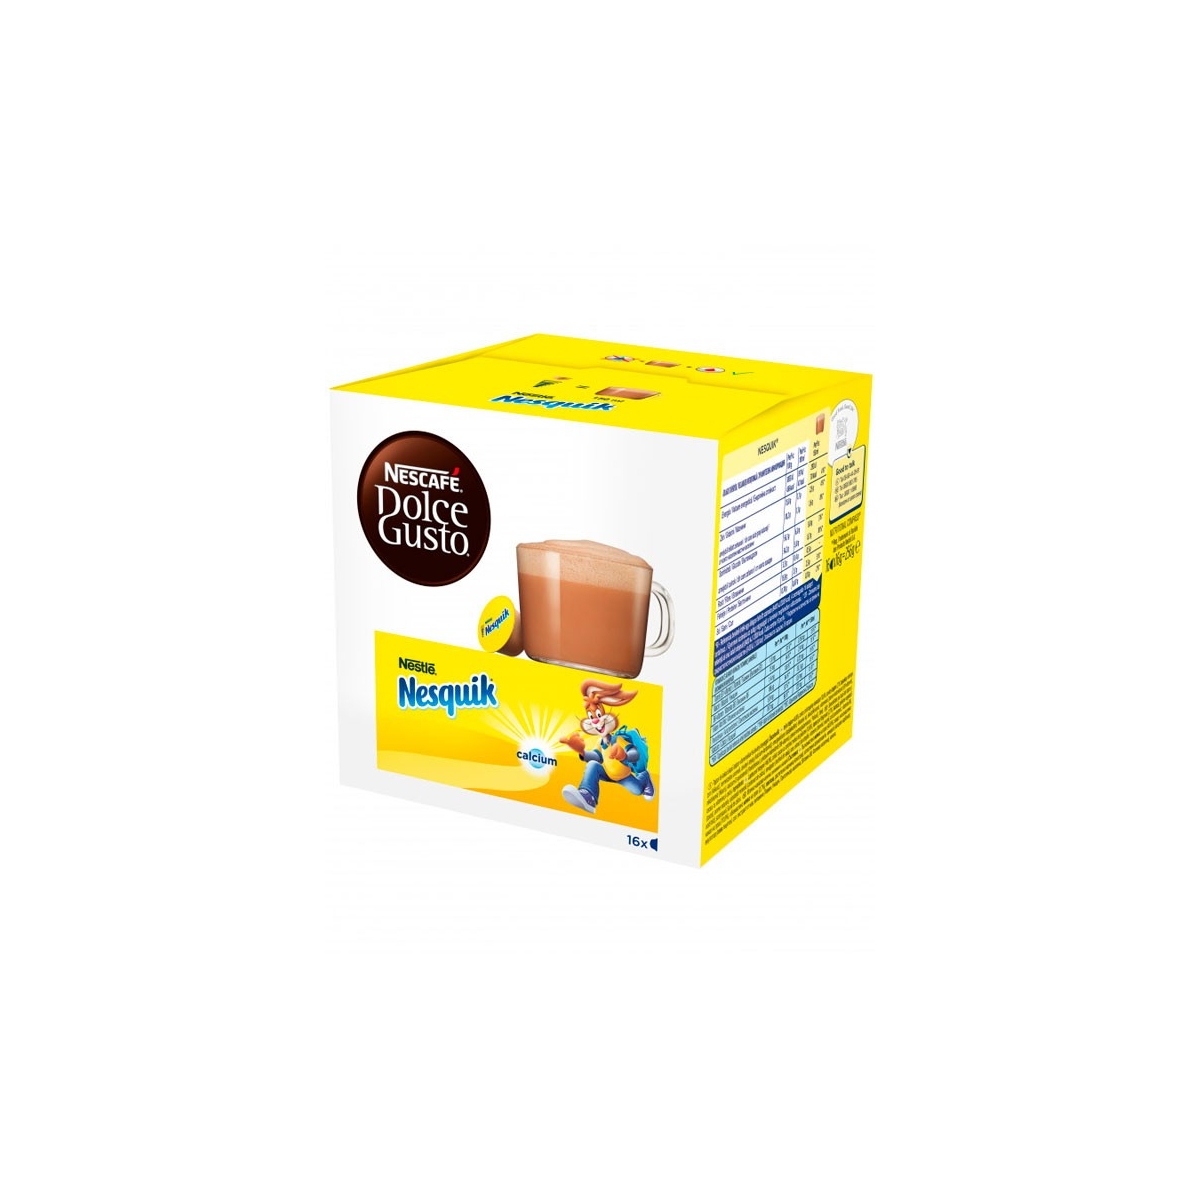 32x Nescafe Dolce Gusto Nesquik Hot Chocolate Pods (2 Packs of 16 Pods